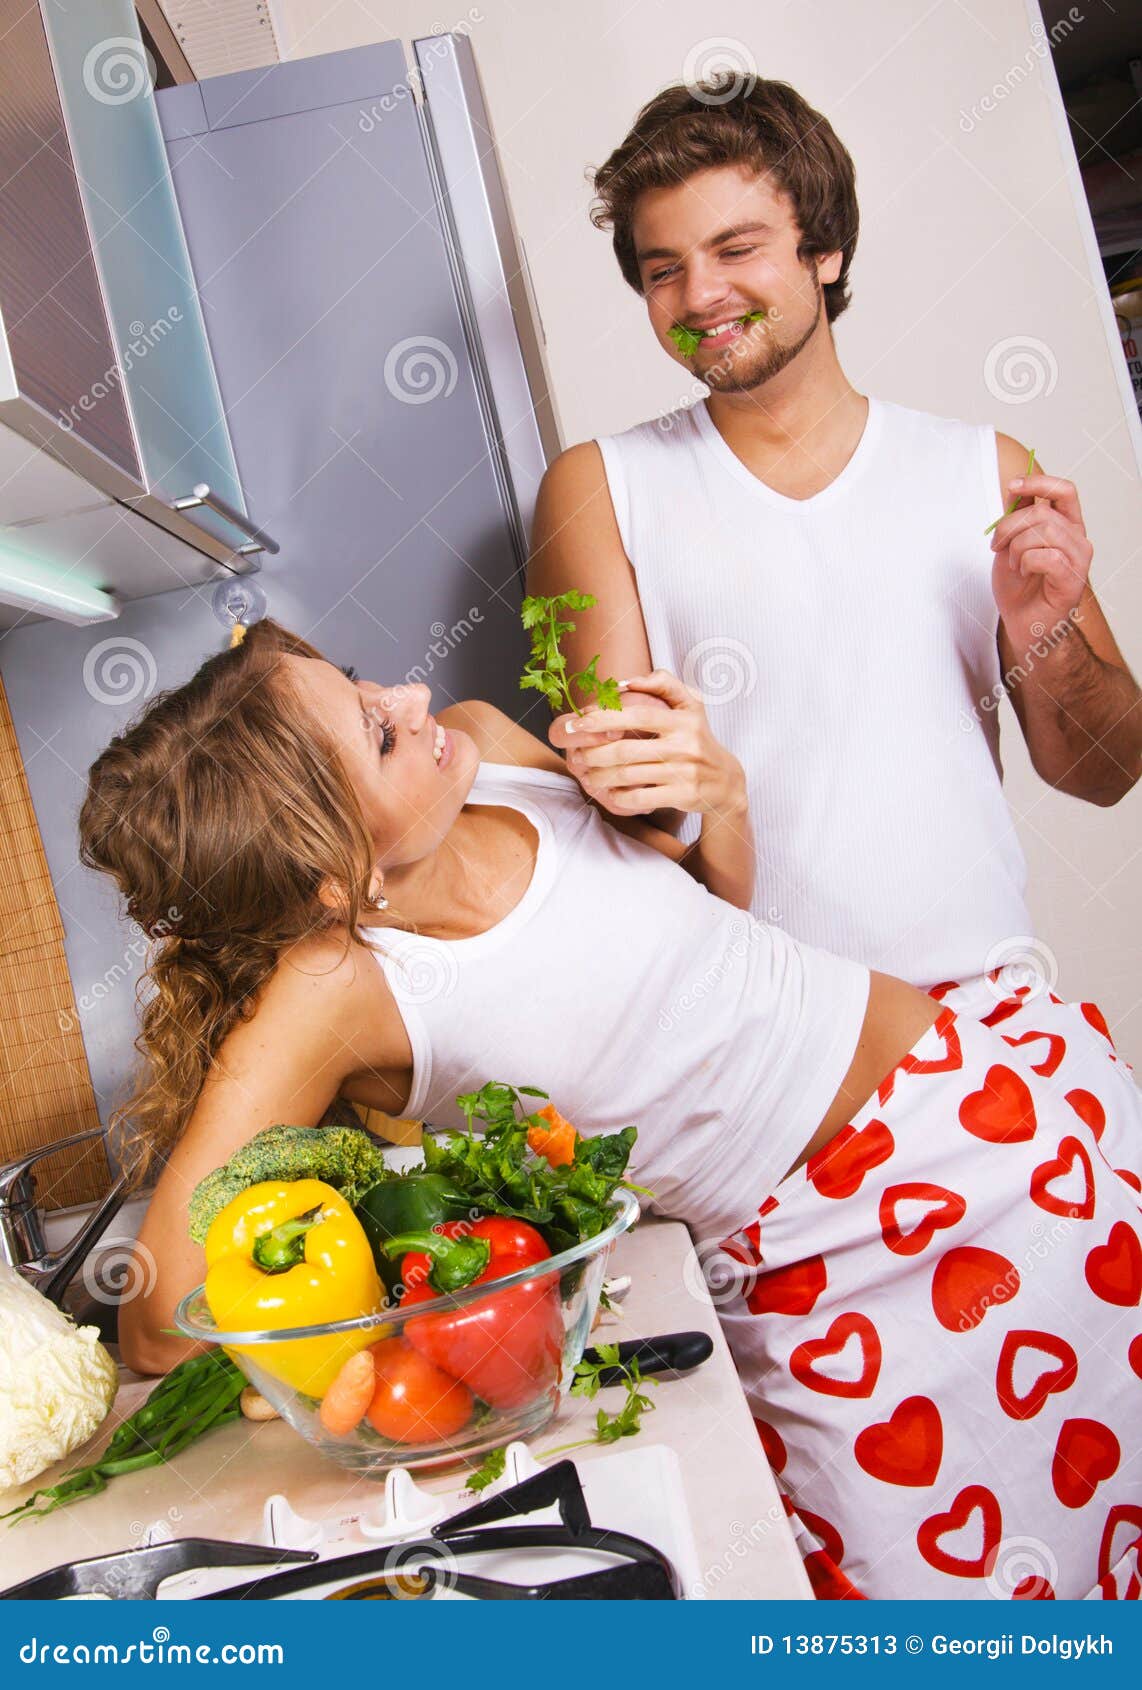 Young Romantic Couple Kitchen 13875313 